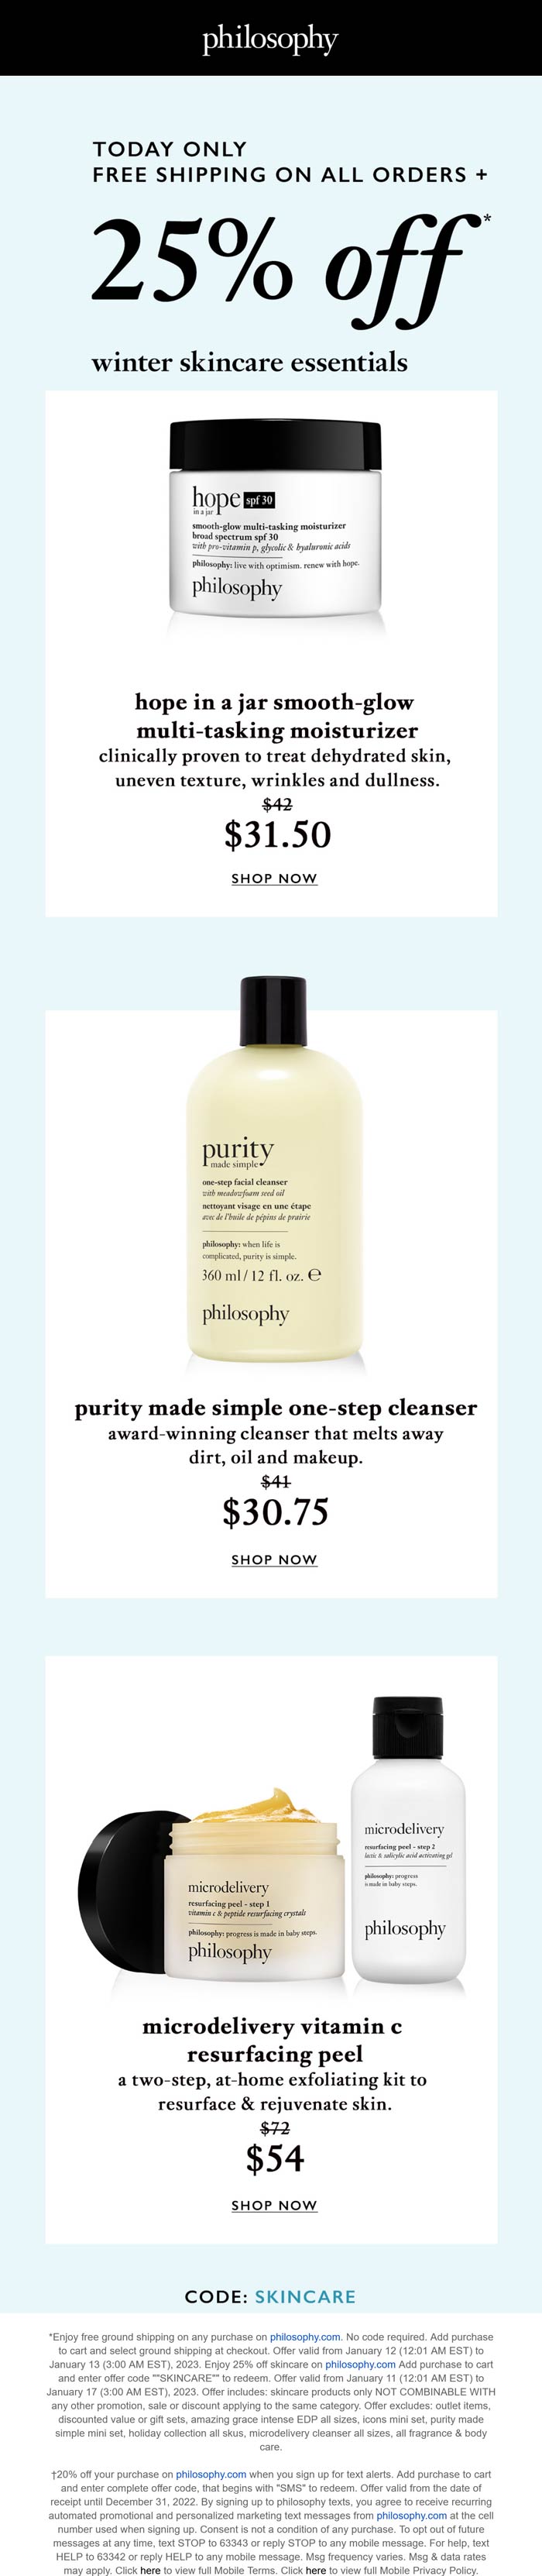 Philosophy stores Coupon  25% off winter skincare today at Philosophy #philosophy 